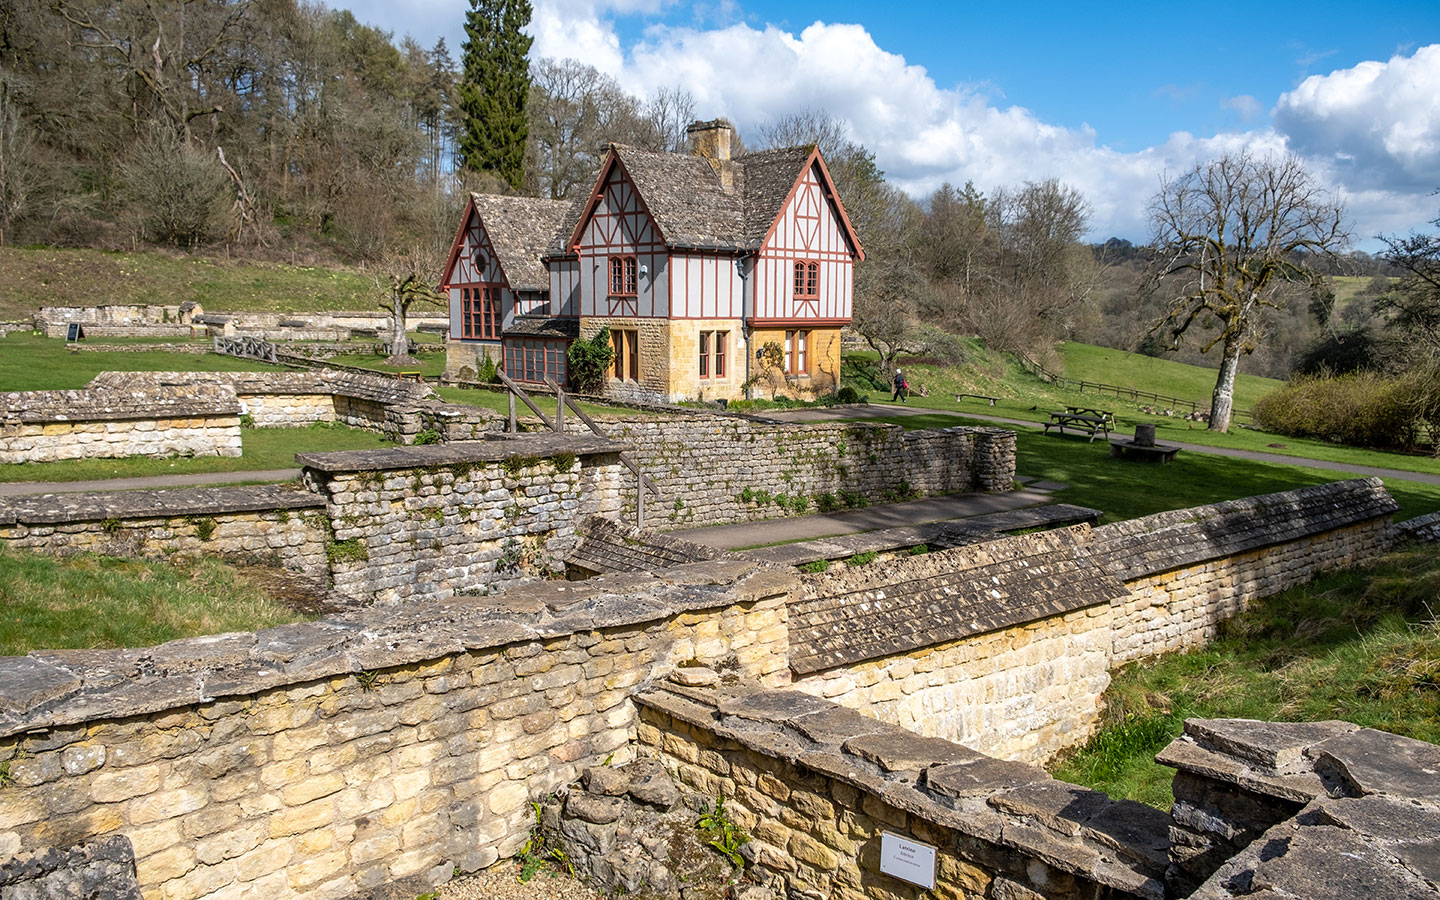 Visiting Chedworth Roman Villa in the Cotswolds